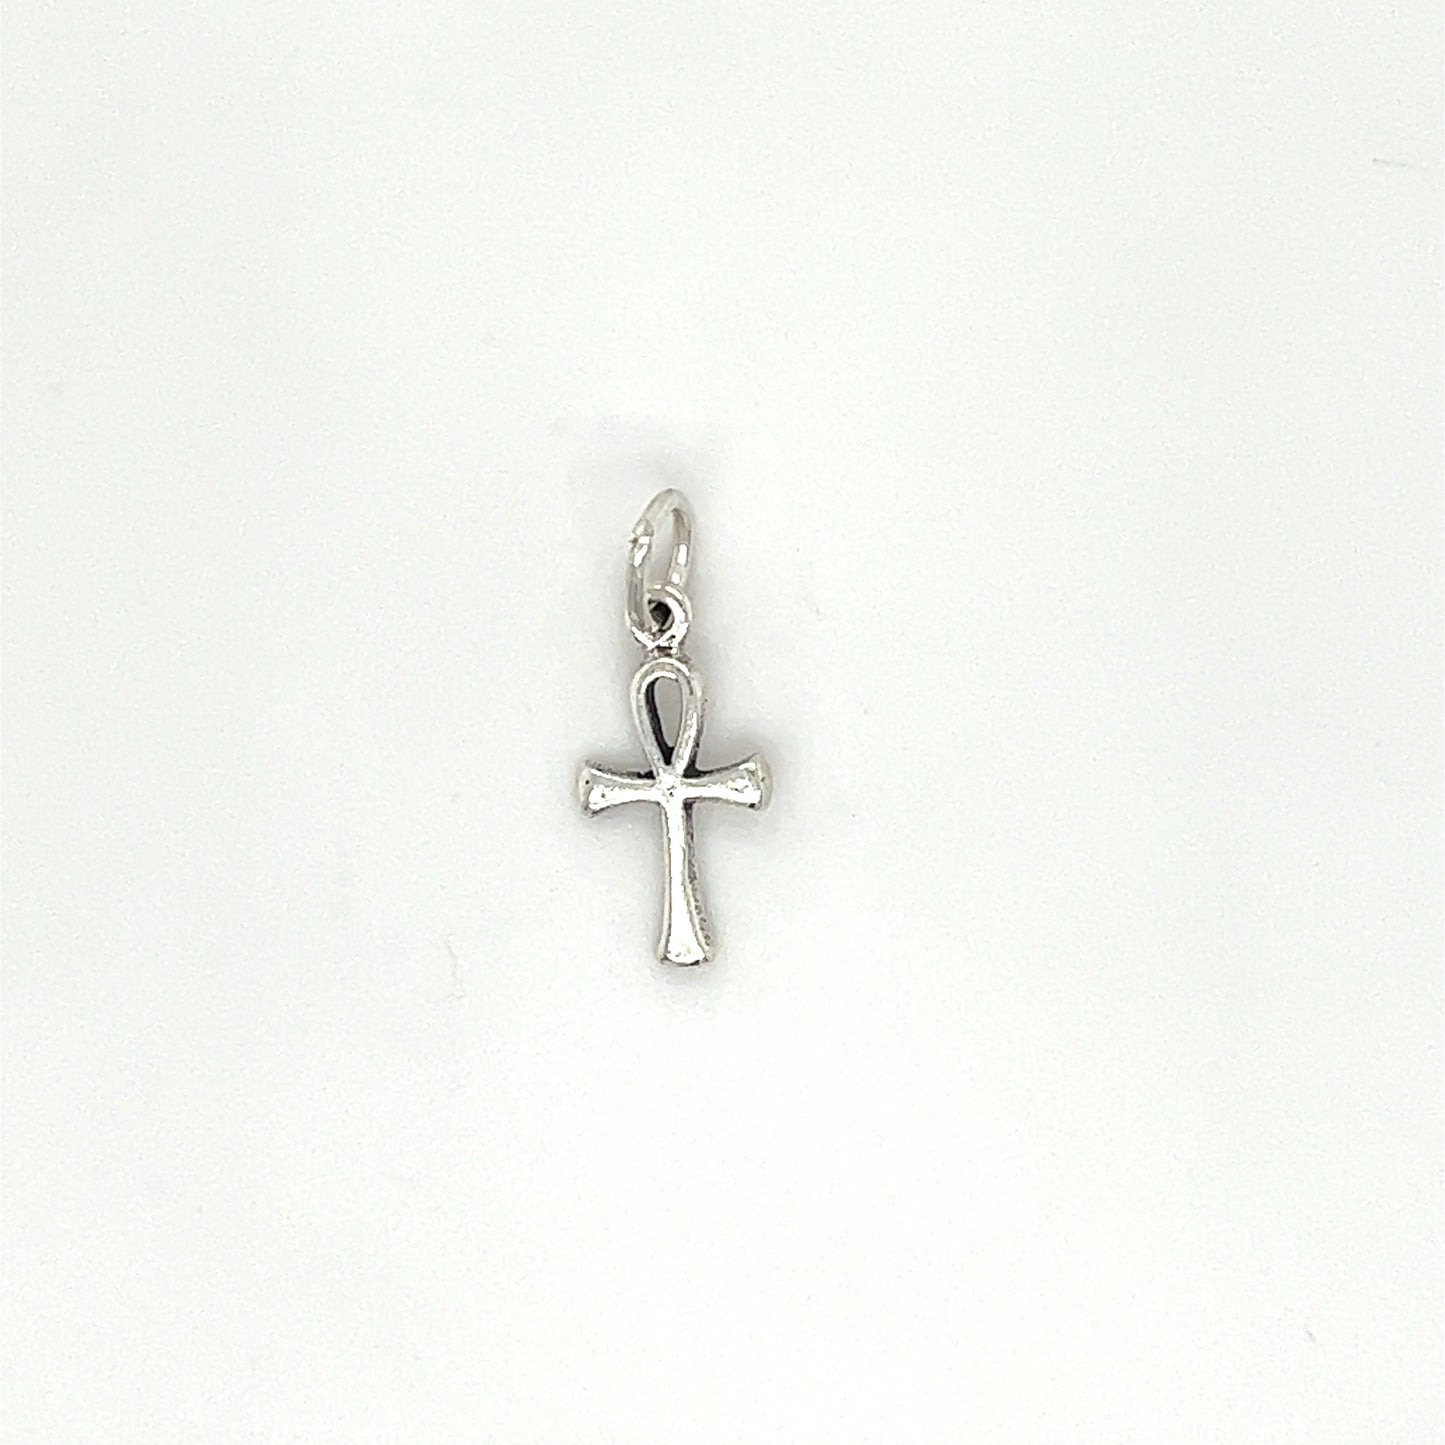 A small silver Enchanting Tiny Ankh Charm representing eternal life on a white background by Super Silver.